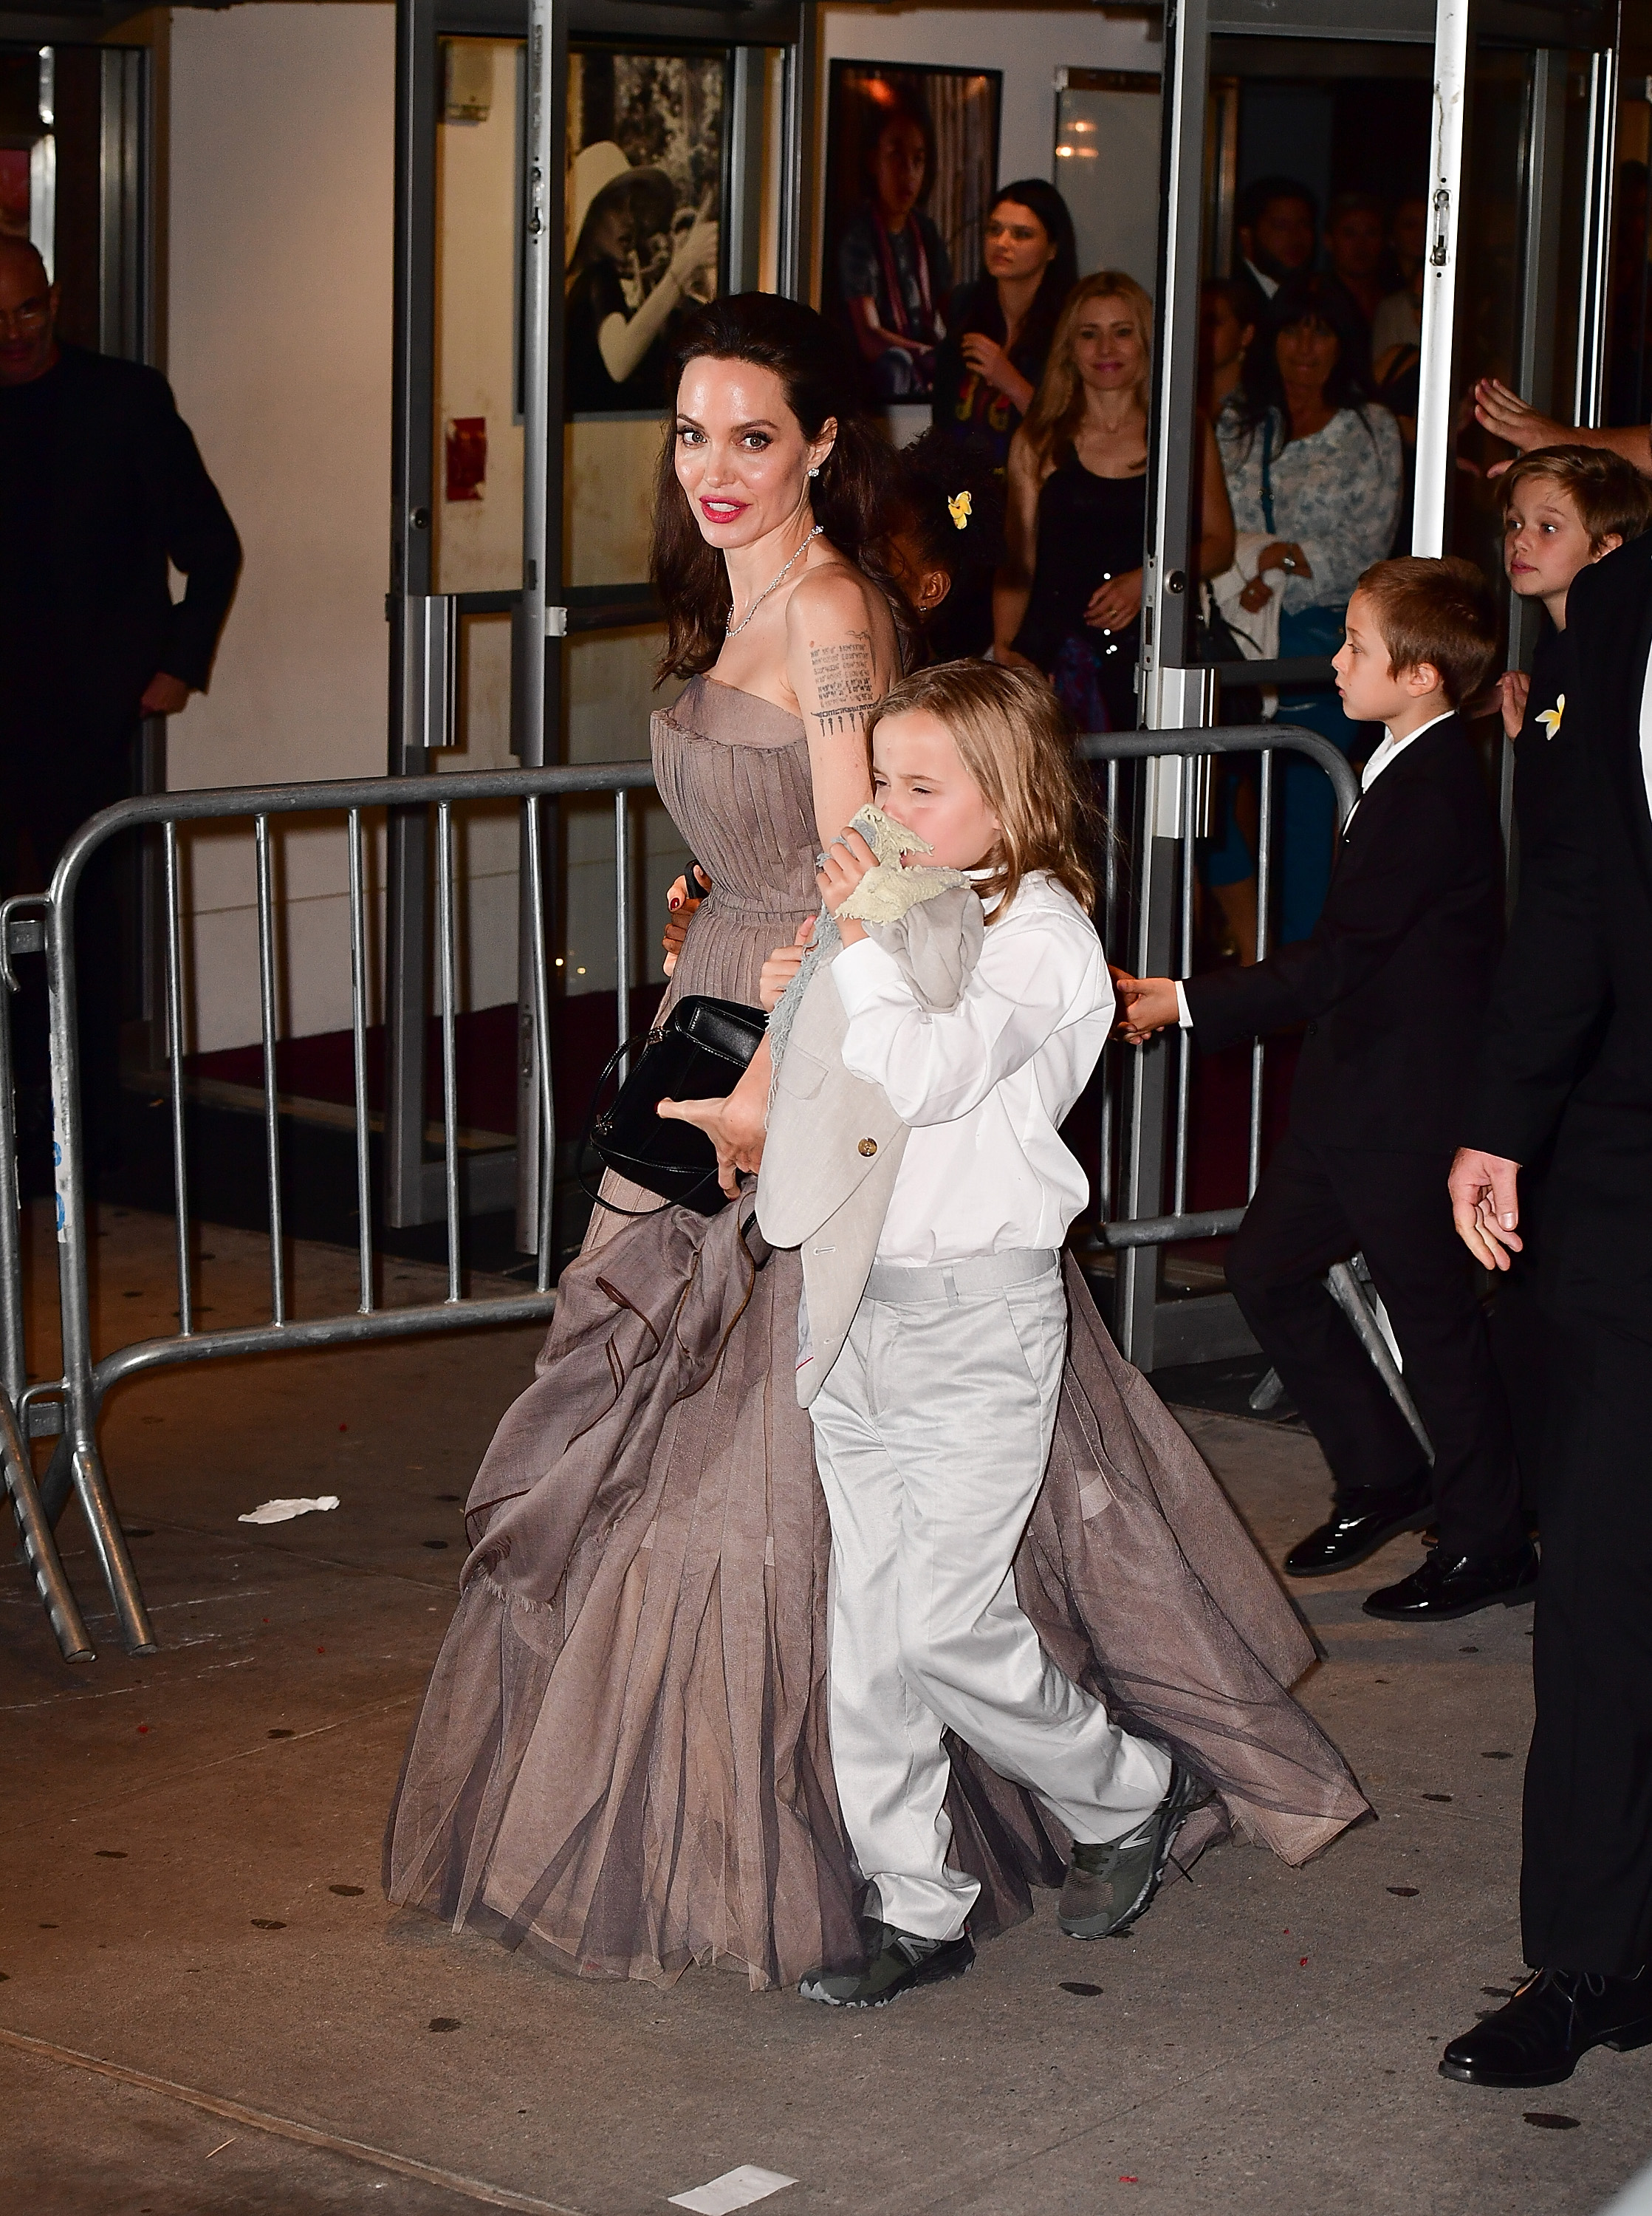 Angelina Jolie and Vivienne Jolie-Pitt New York during the premiere of 'First They Killed My Father' at the DGA Theater on September 14, 2017 in New York City | Source: Getty Images